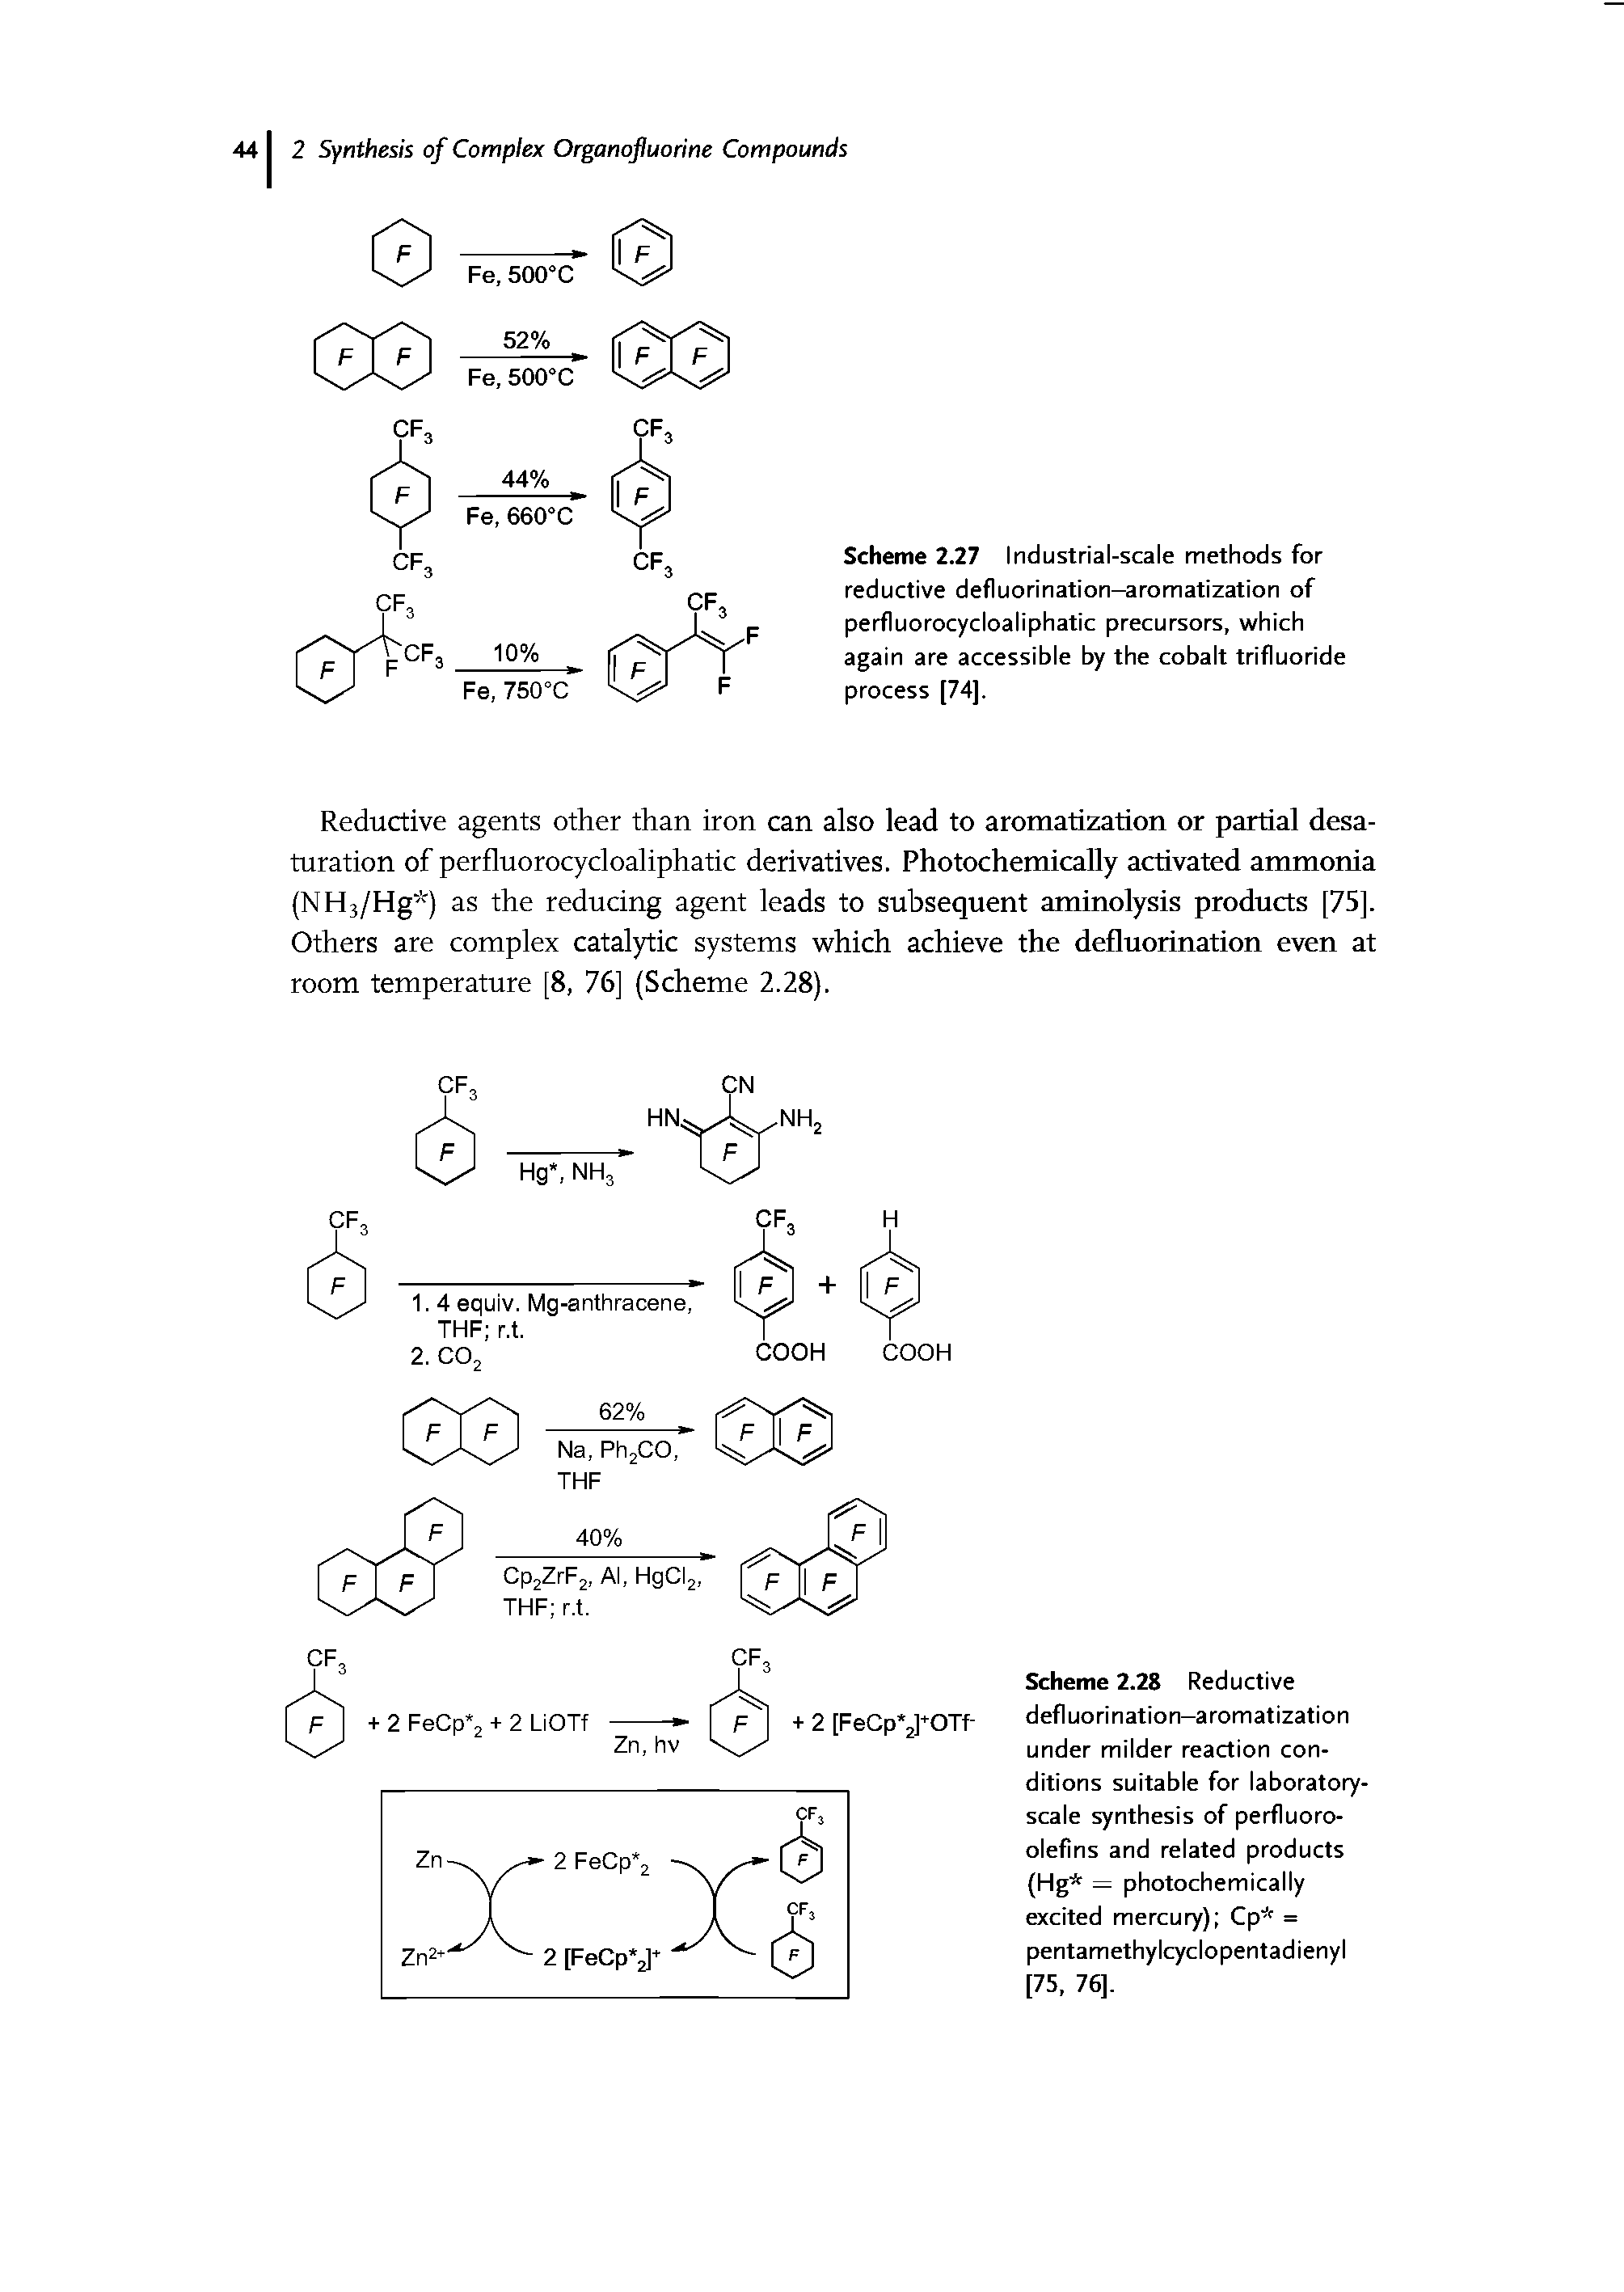 Scheme 2.27 Industrial-scale methods for reductive defluorination—aromatization of perfluorocycloaliphatic precursors, which again are accessible by the cobalt trifluoride process [74].